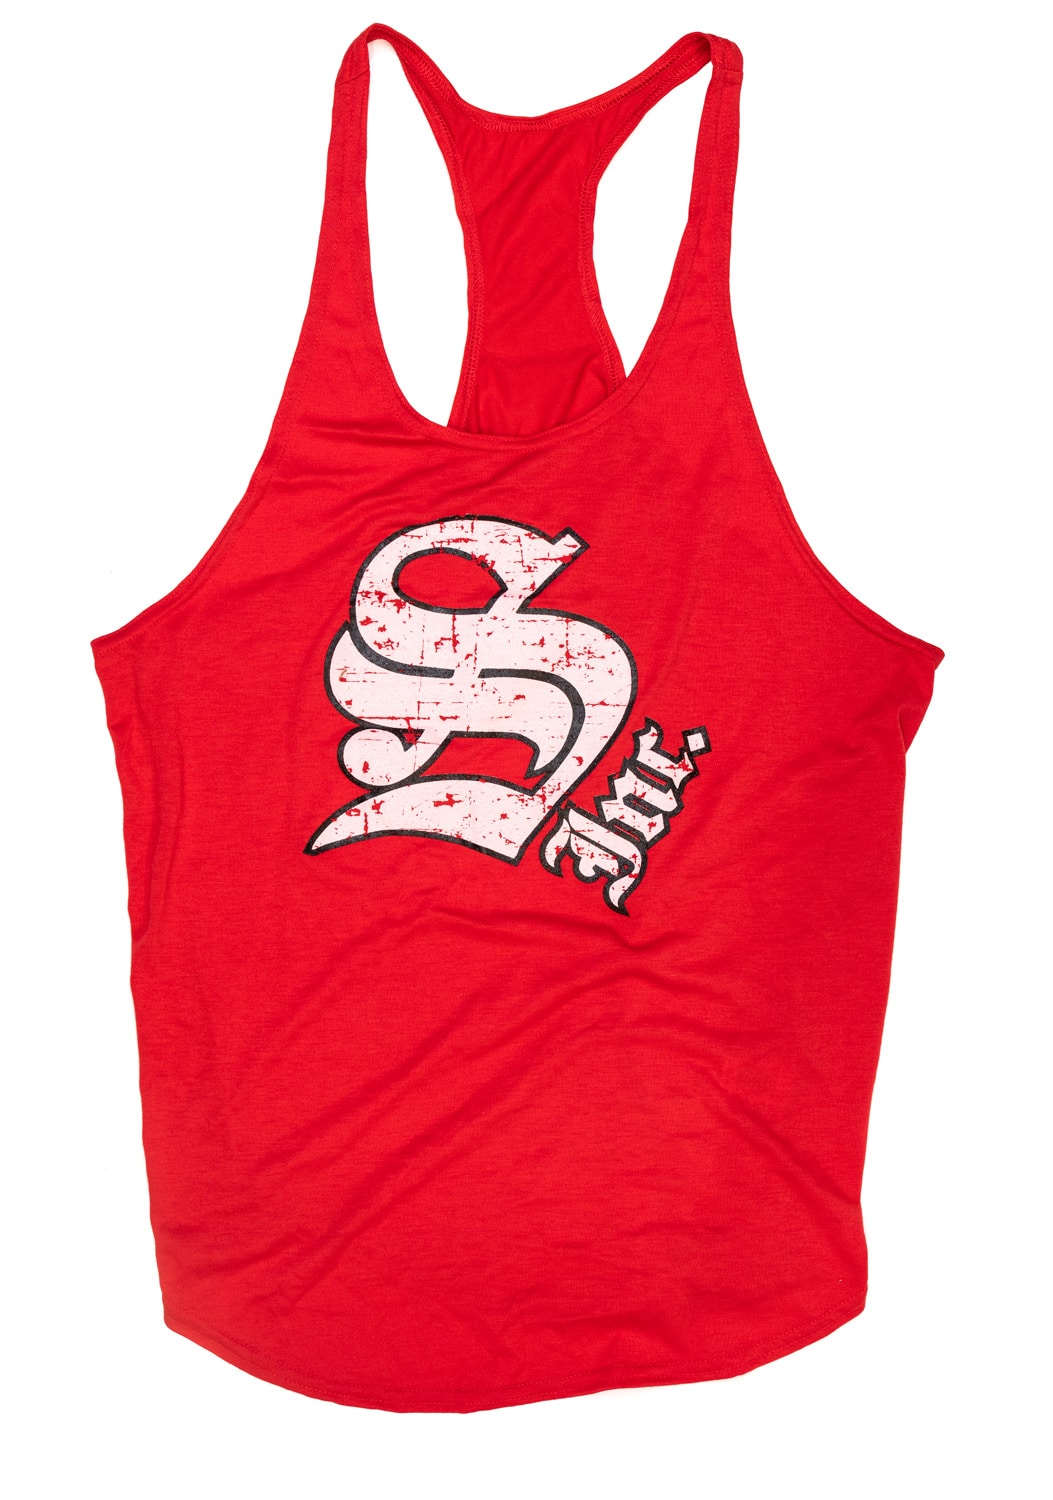 Spud, Inc. Southie Stringers | Buy 100% Best Quality Products